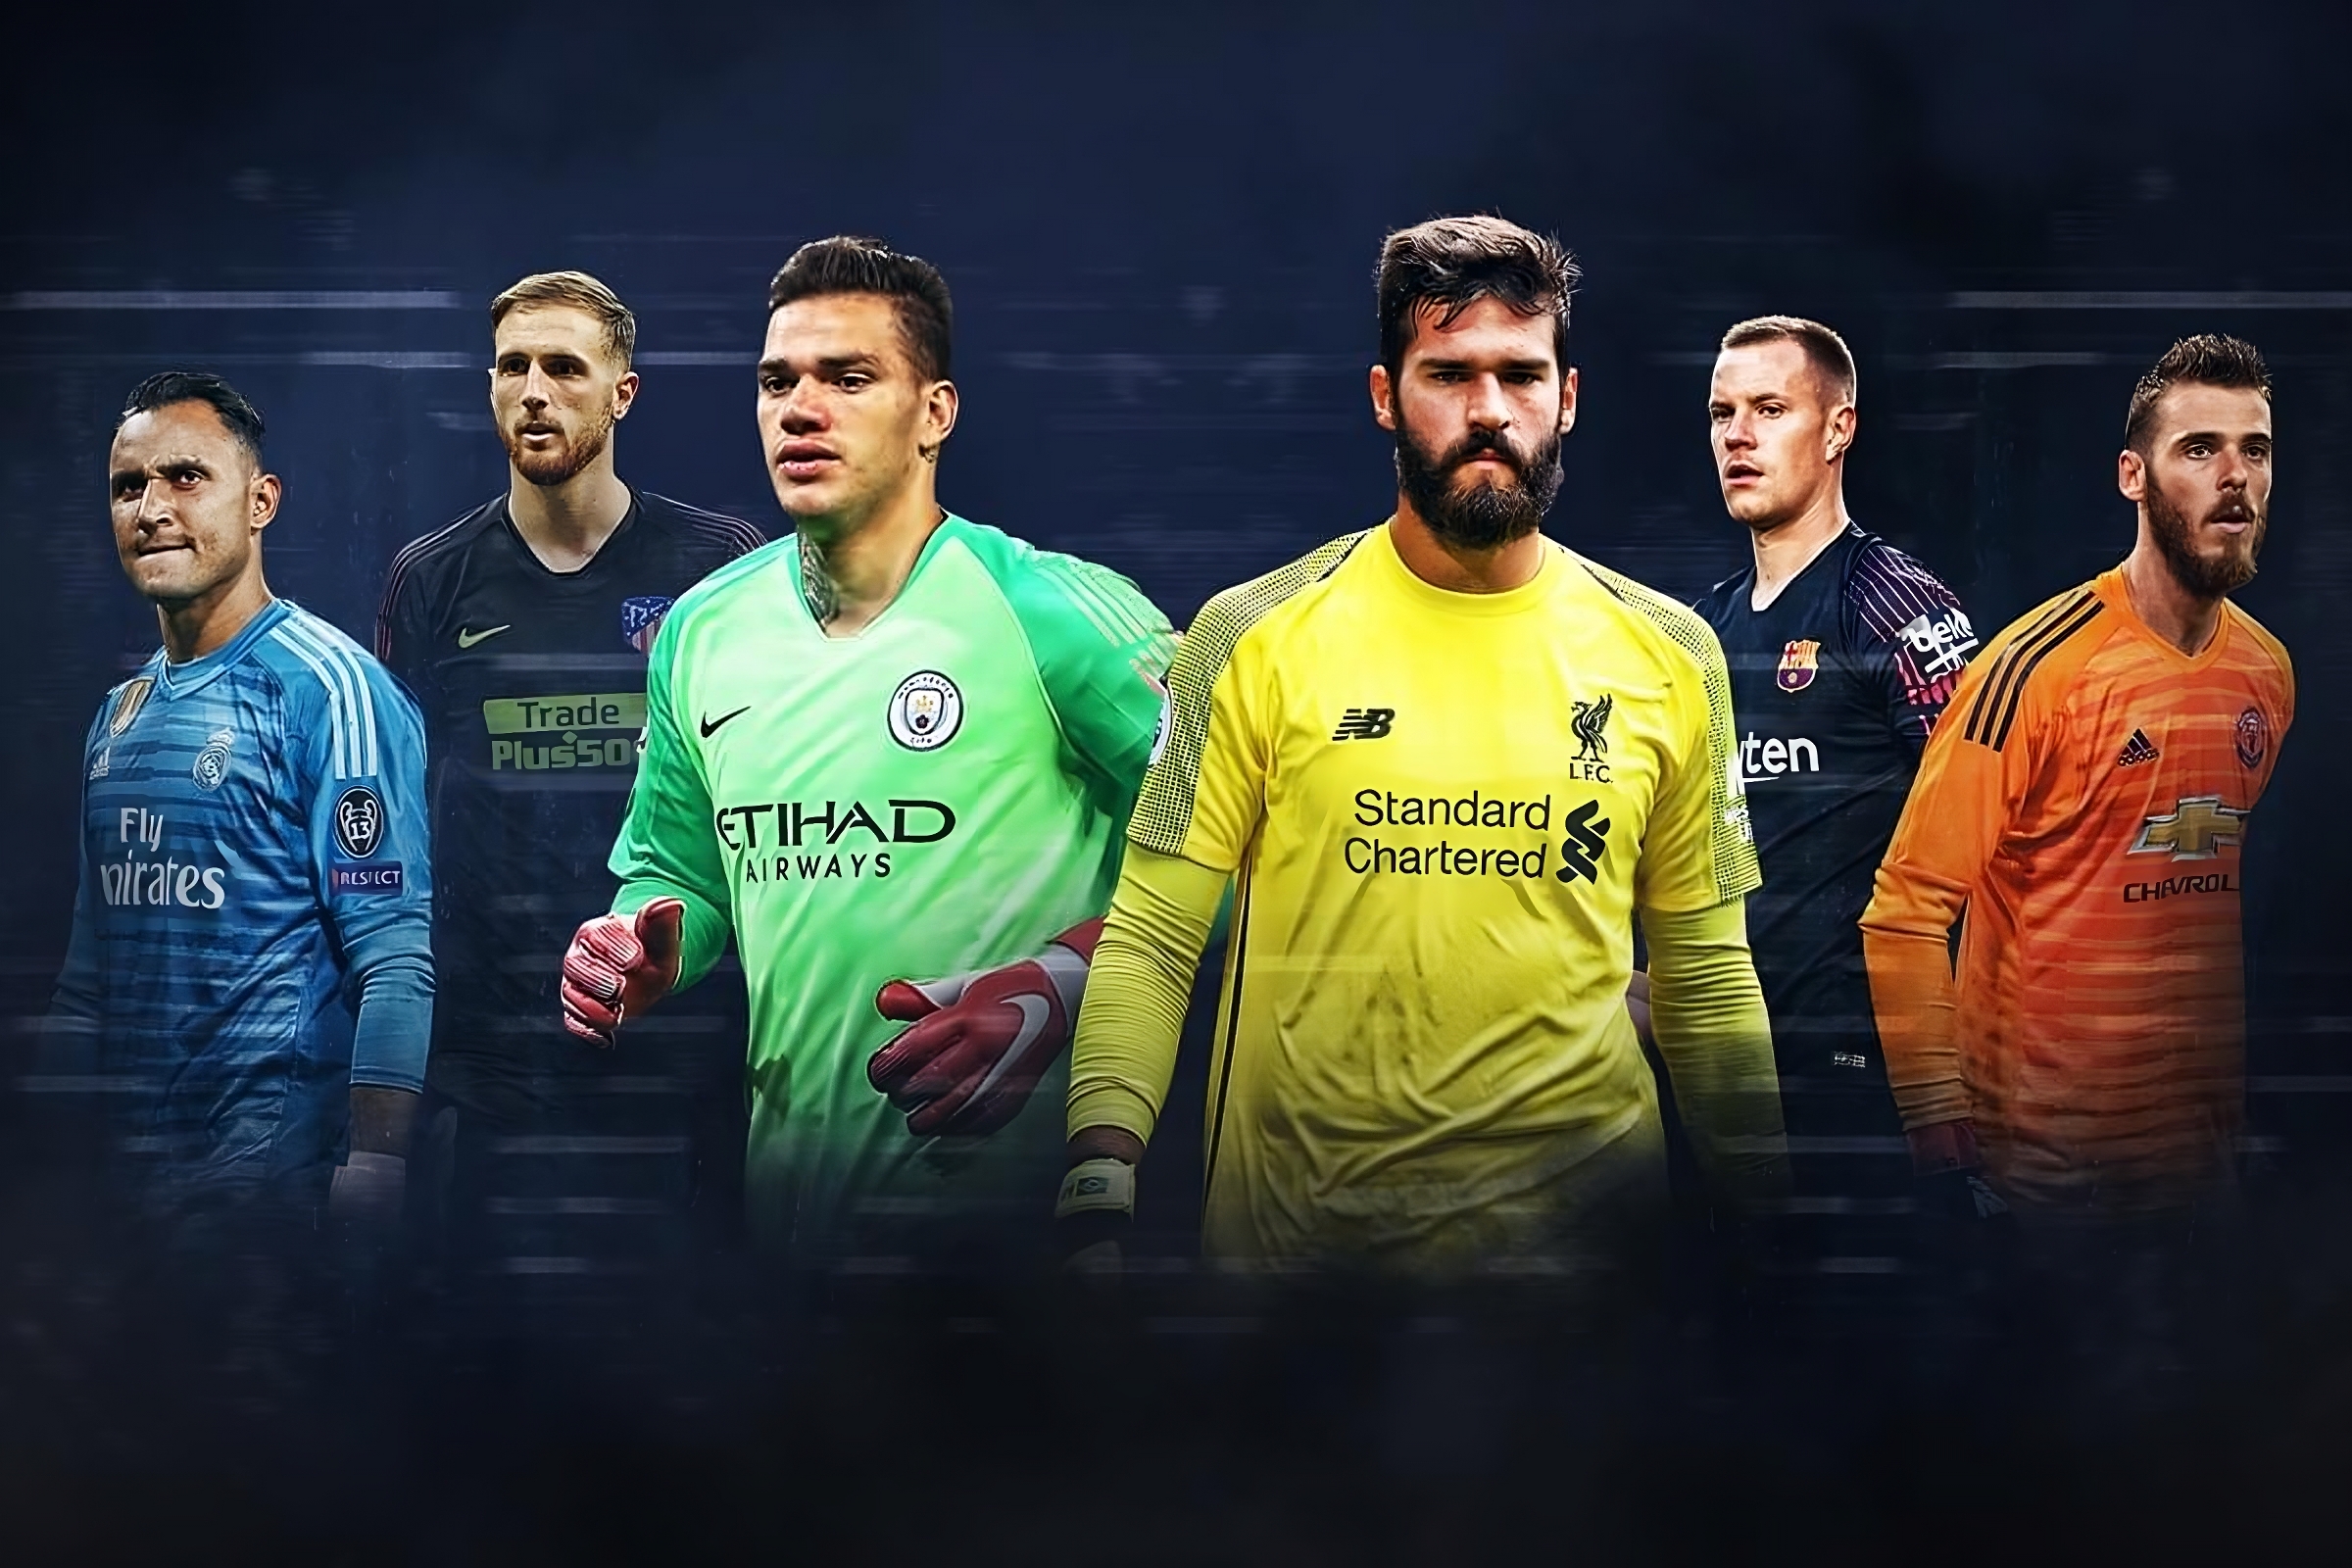 Goalkeepers play a crucial role in the build-up. In the past years, we've seen how goalkeepers such as Alisson, Ederson or Ter Stegen set new standards for the coming generations of keepers